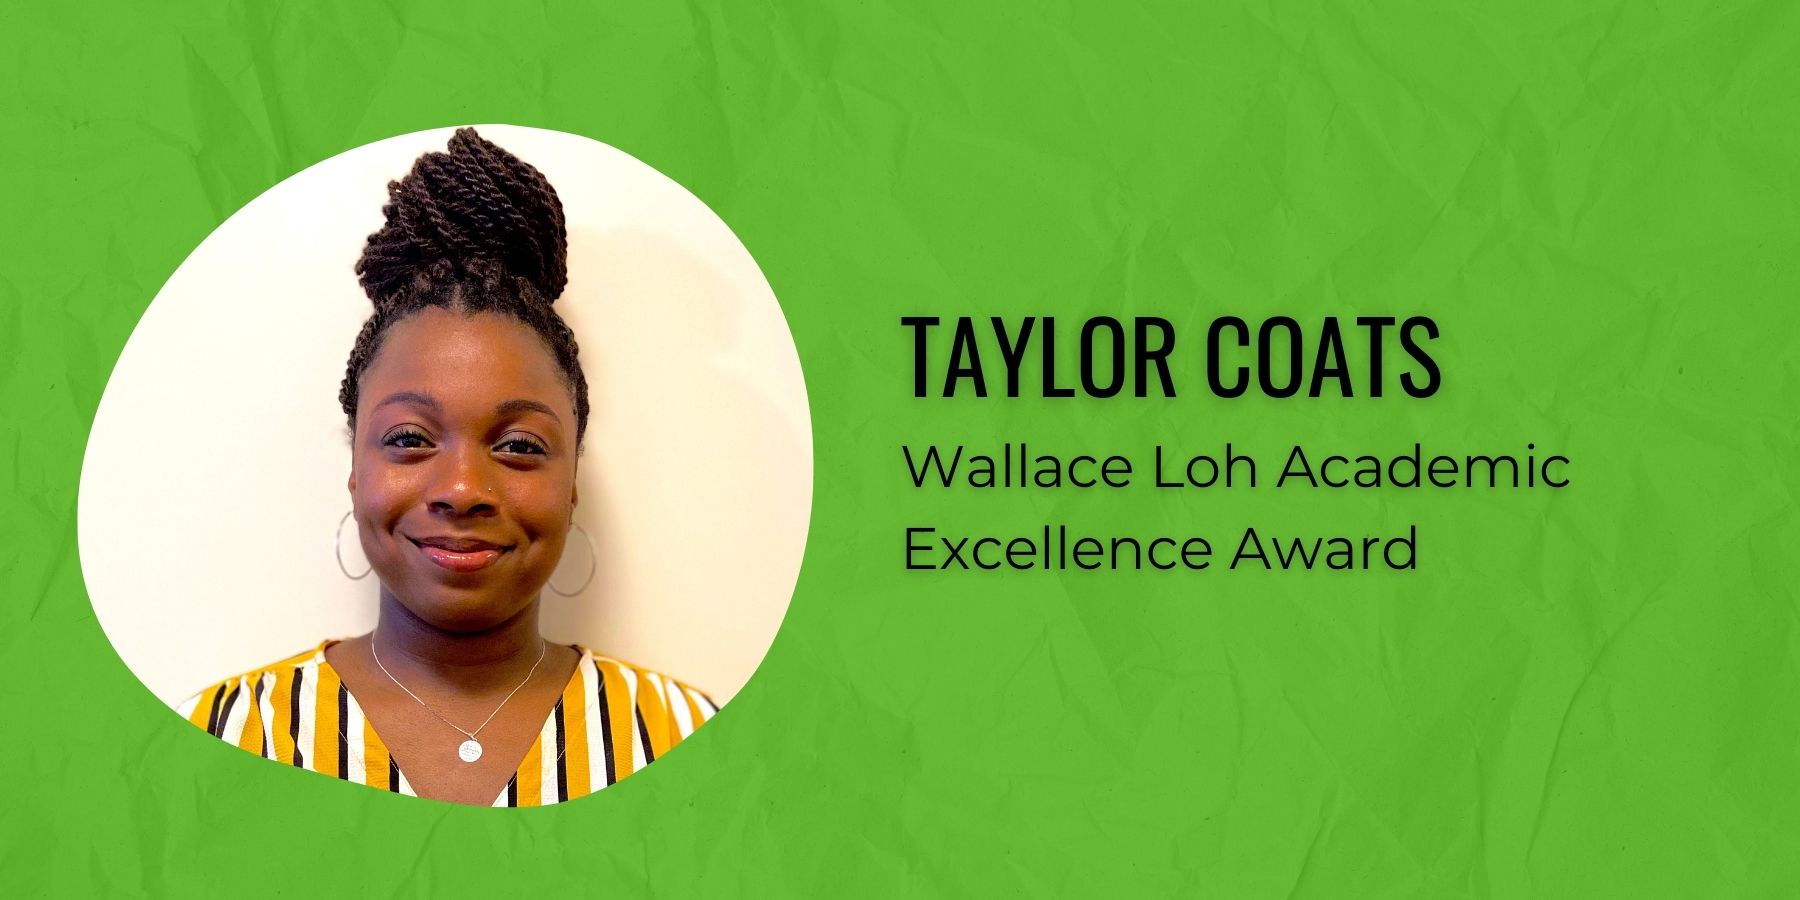 Picture of Taylor Coats and text Wallace Loh Academic Excellence Award